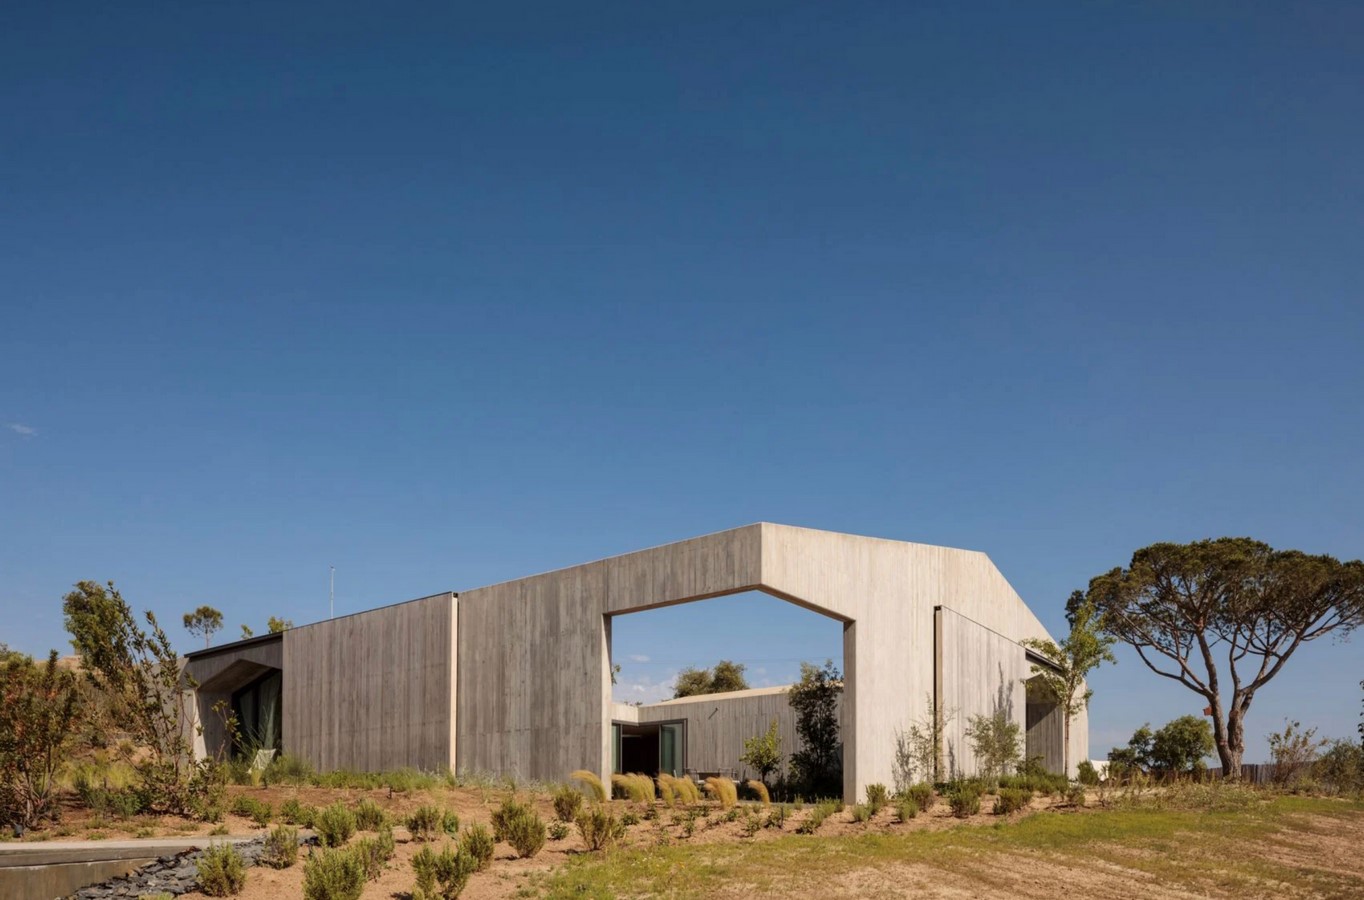 Minimalist concrete holiday homes with matching cutaways built by Manuel Aires Mateus - Sheet4